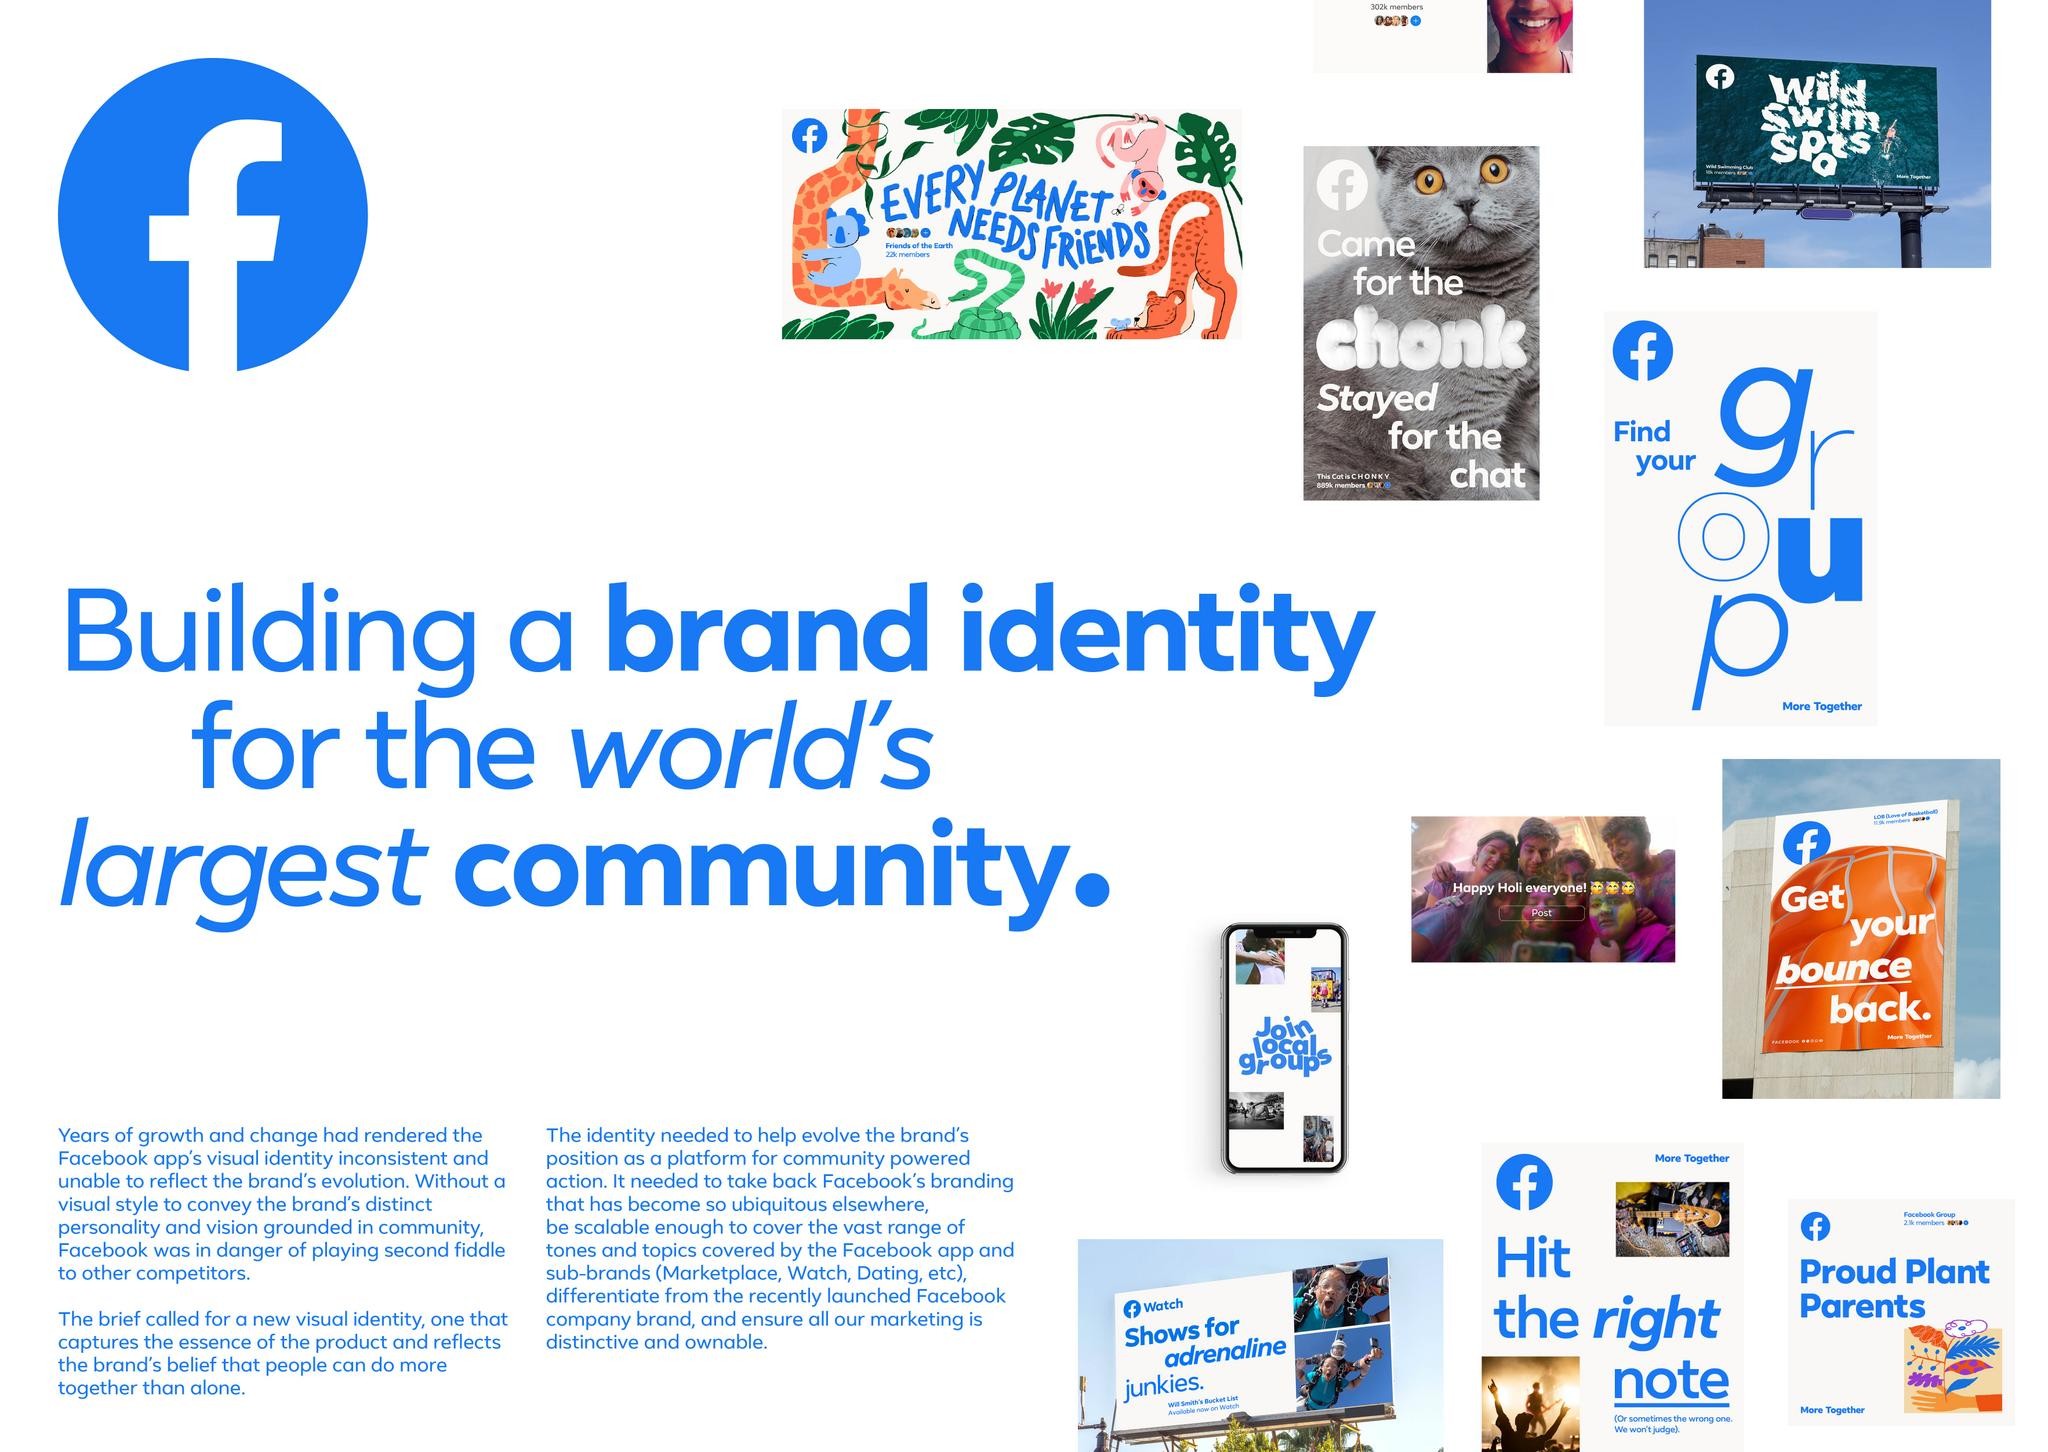 Building a brand identity for the world's largest community